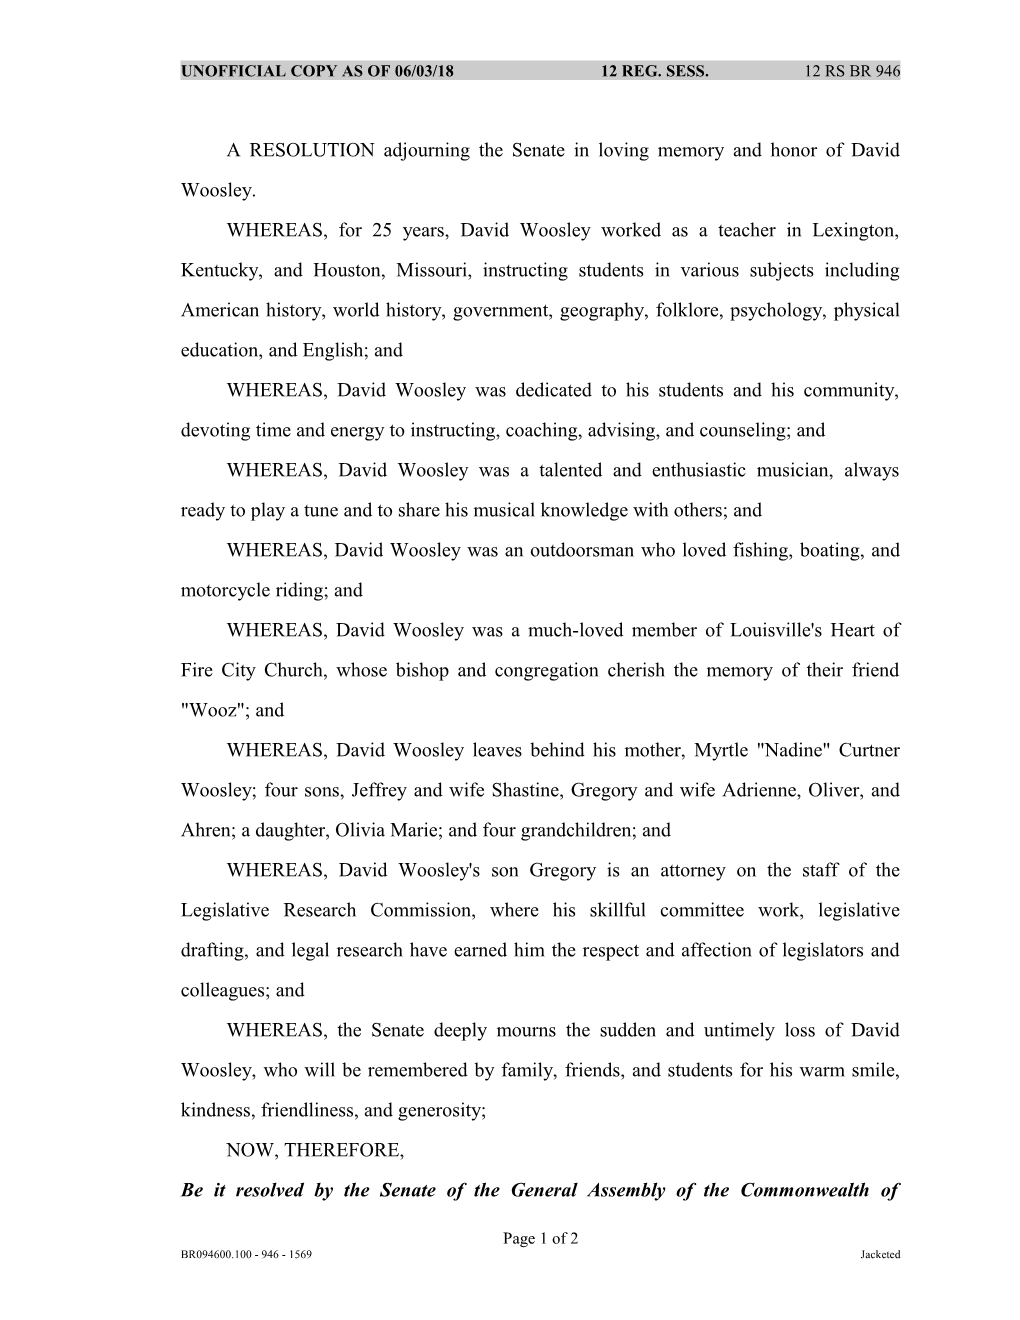 A RESOLUTION Adjourning the Senate in Loving Memory and Honor of David Woosley